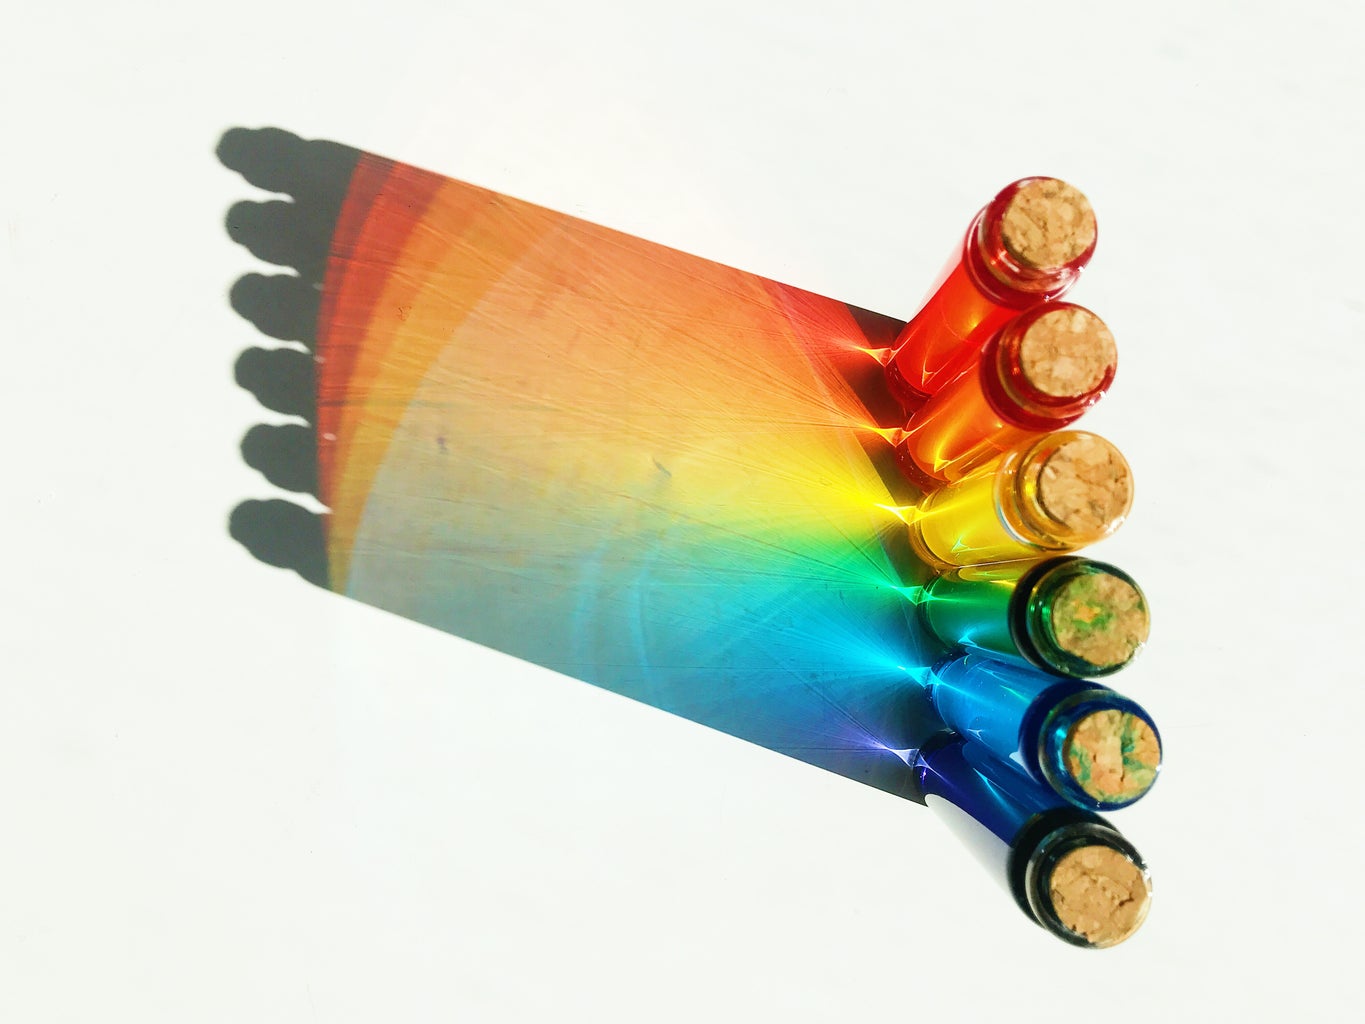 light shining through 6 different colored glass bottles to form a rainbow